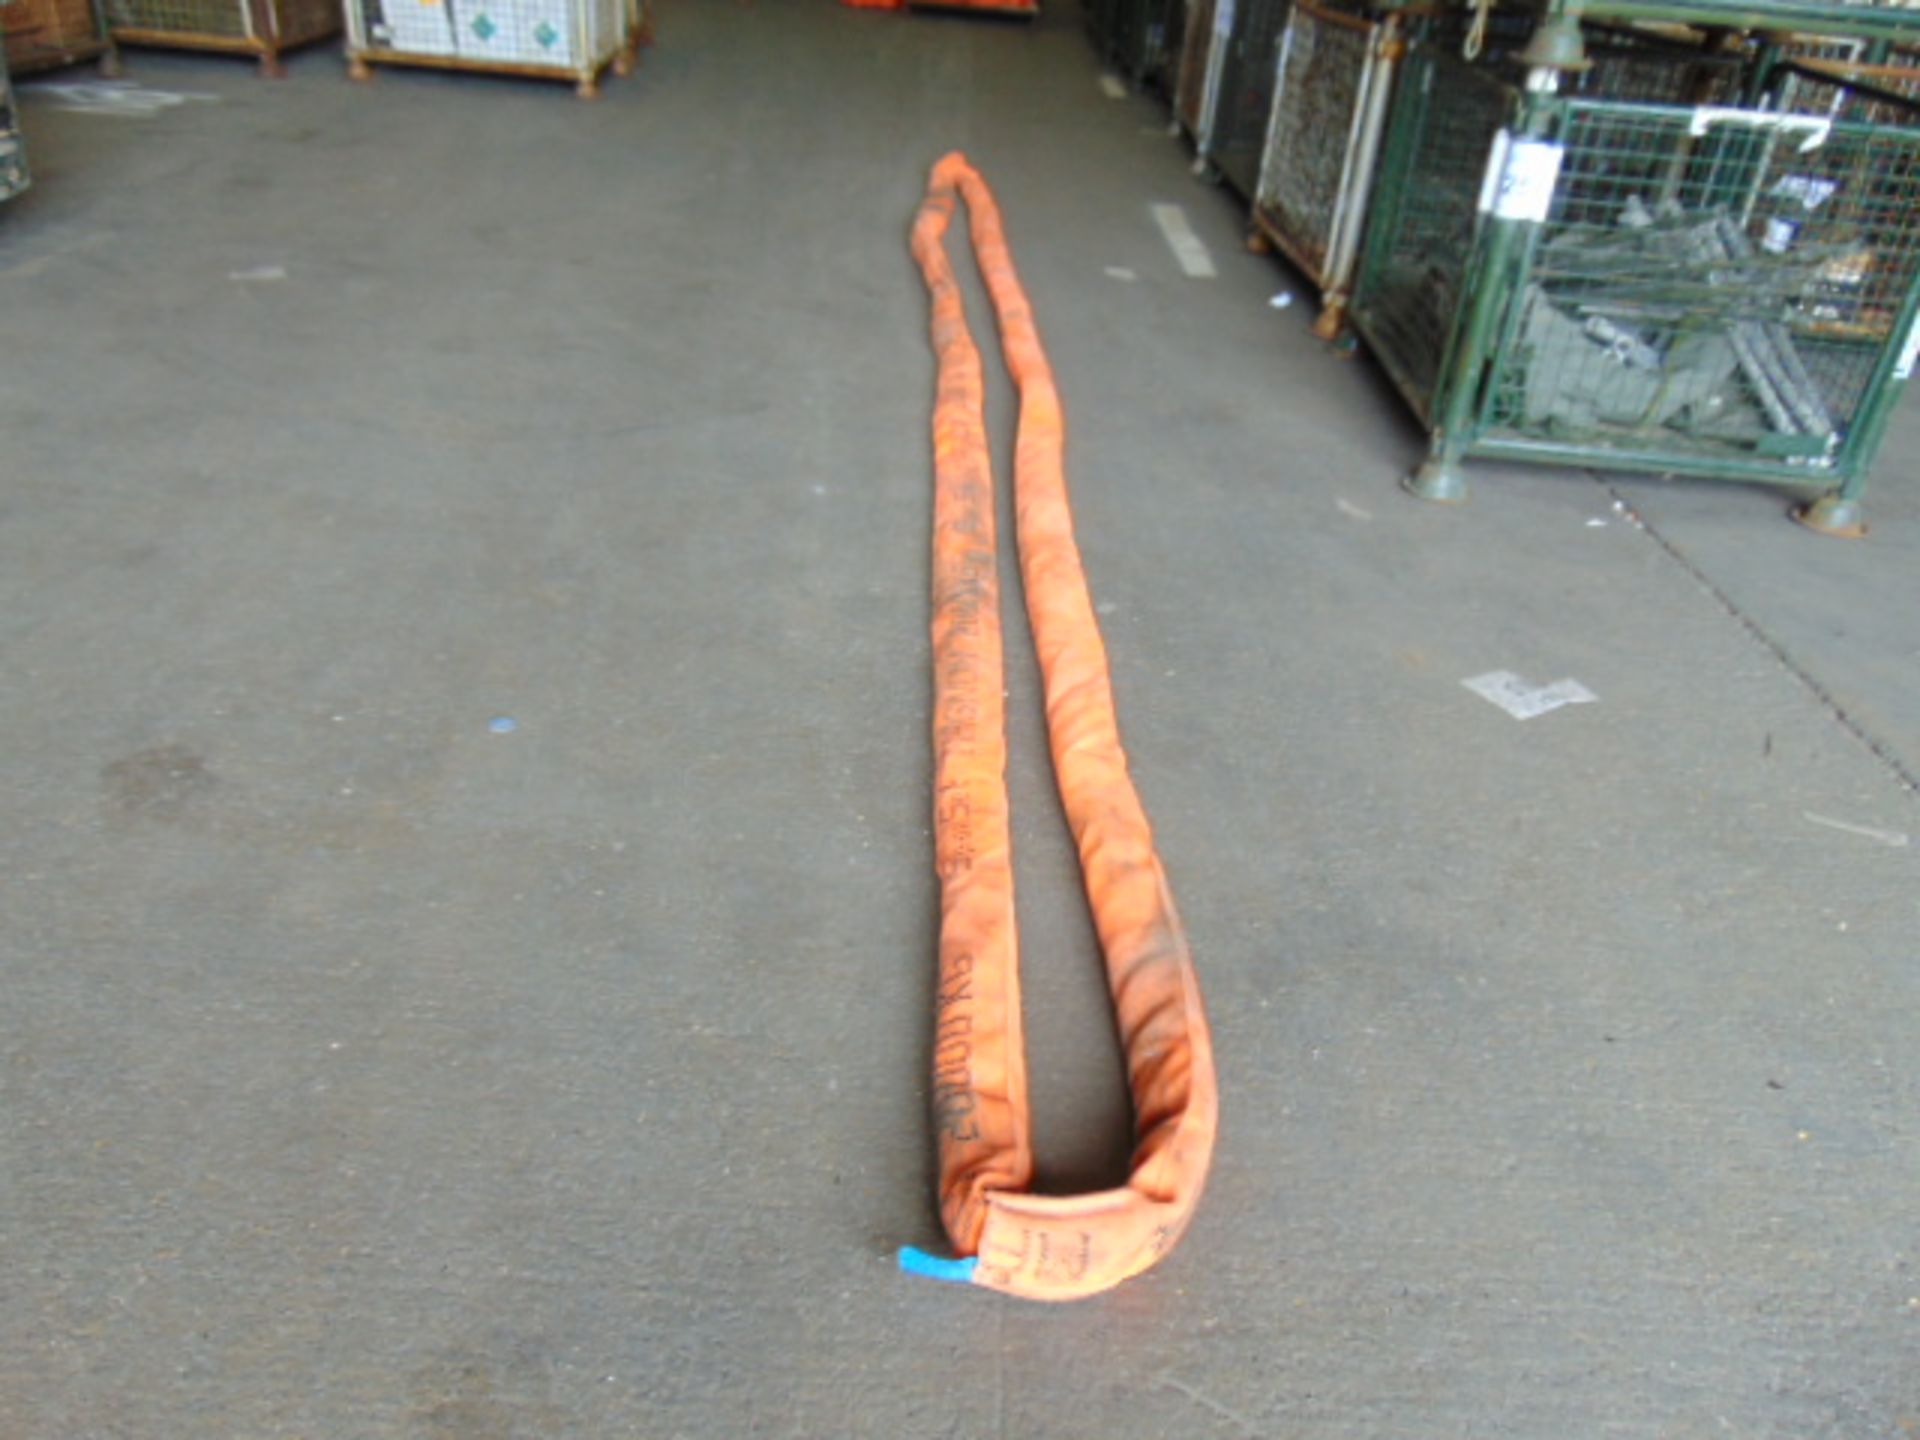 SpanSet Magnum 20,000kg Lifting/Recovery Strop from MOD